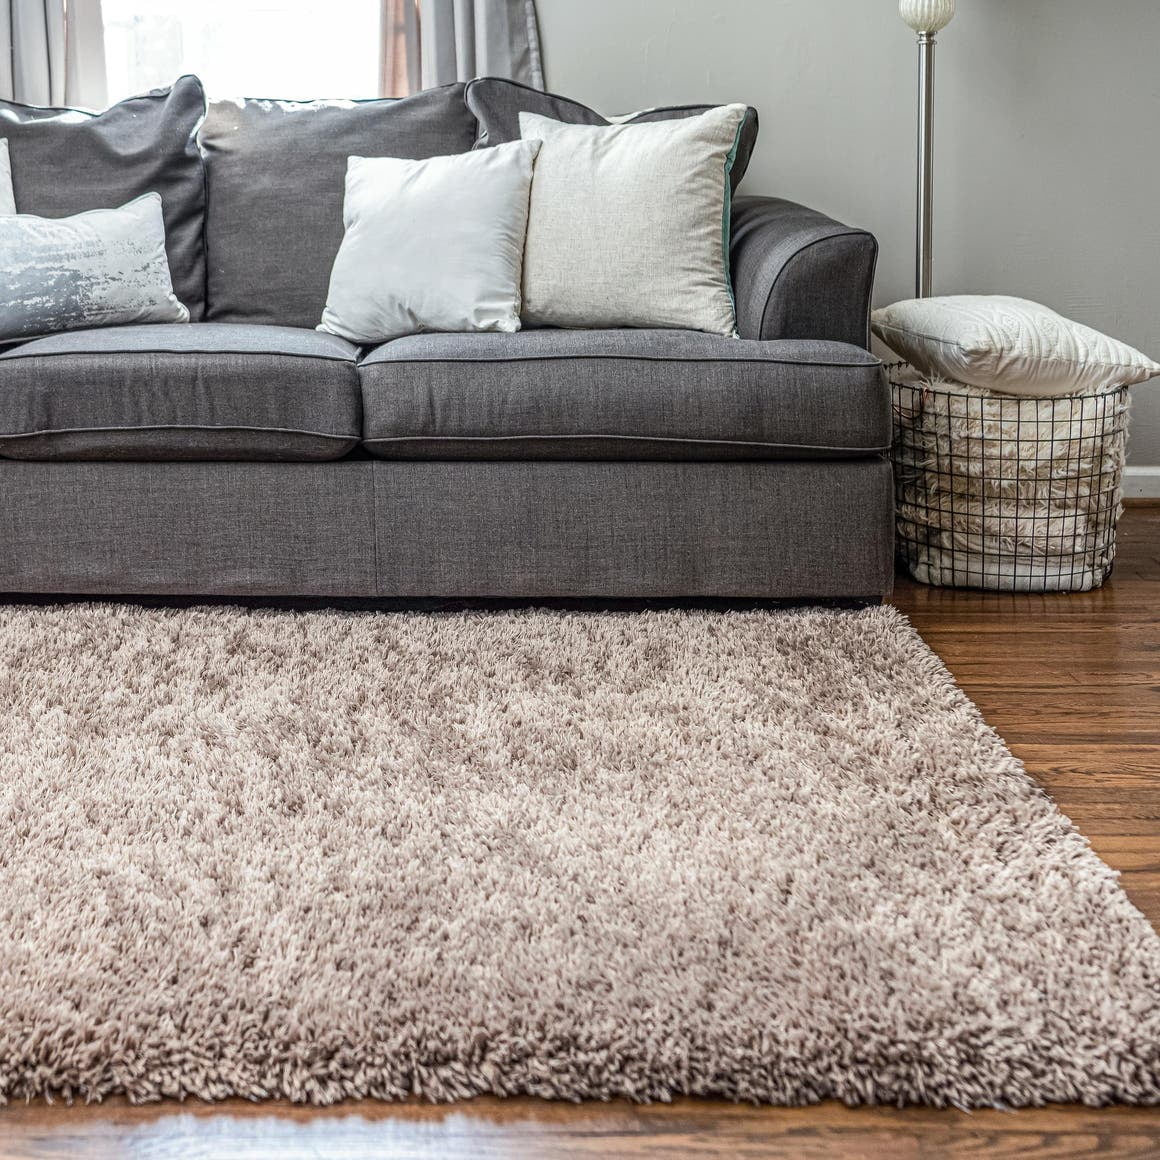 Contemporary Living and Bedroom Soft Shaggy Area Rug 3'3X4'7 Cozy Shag Collection Cream Solid Shag Rug